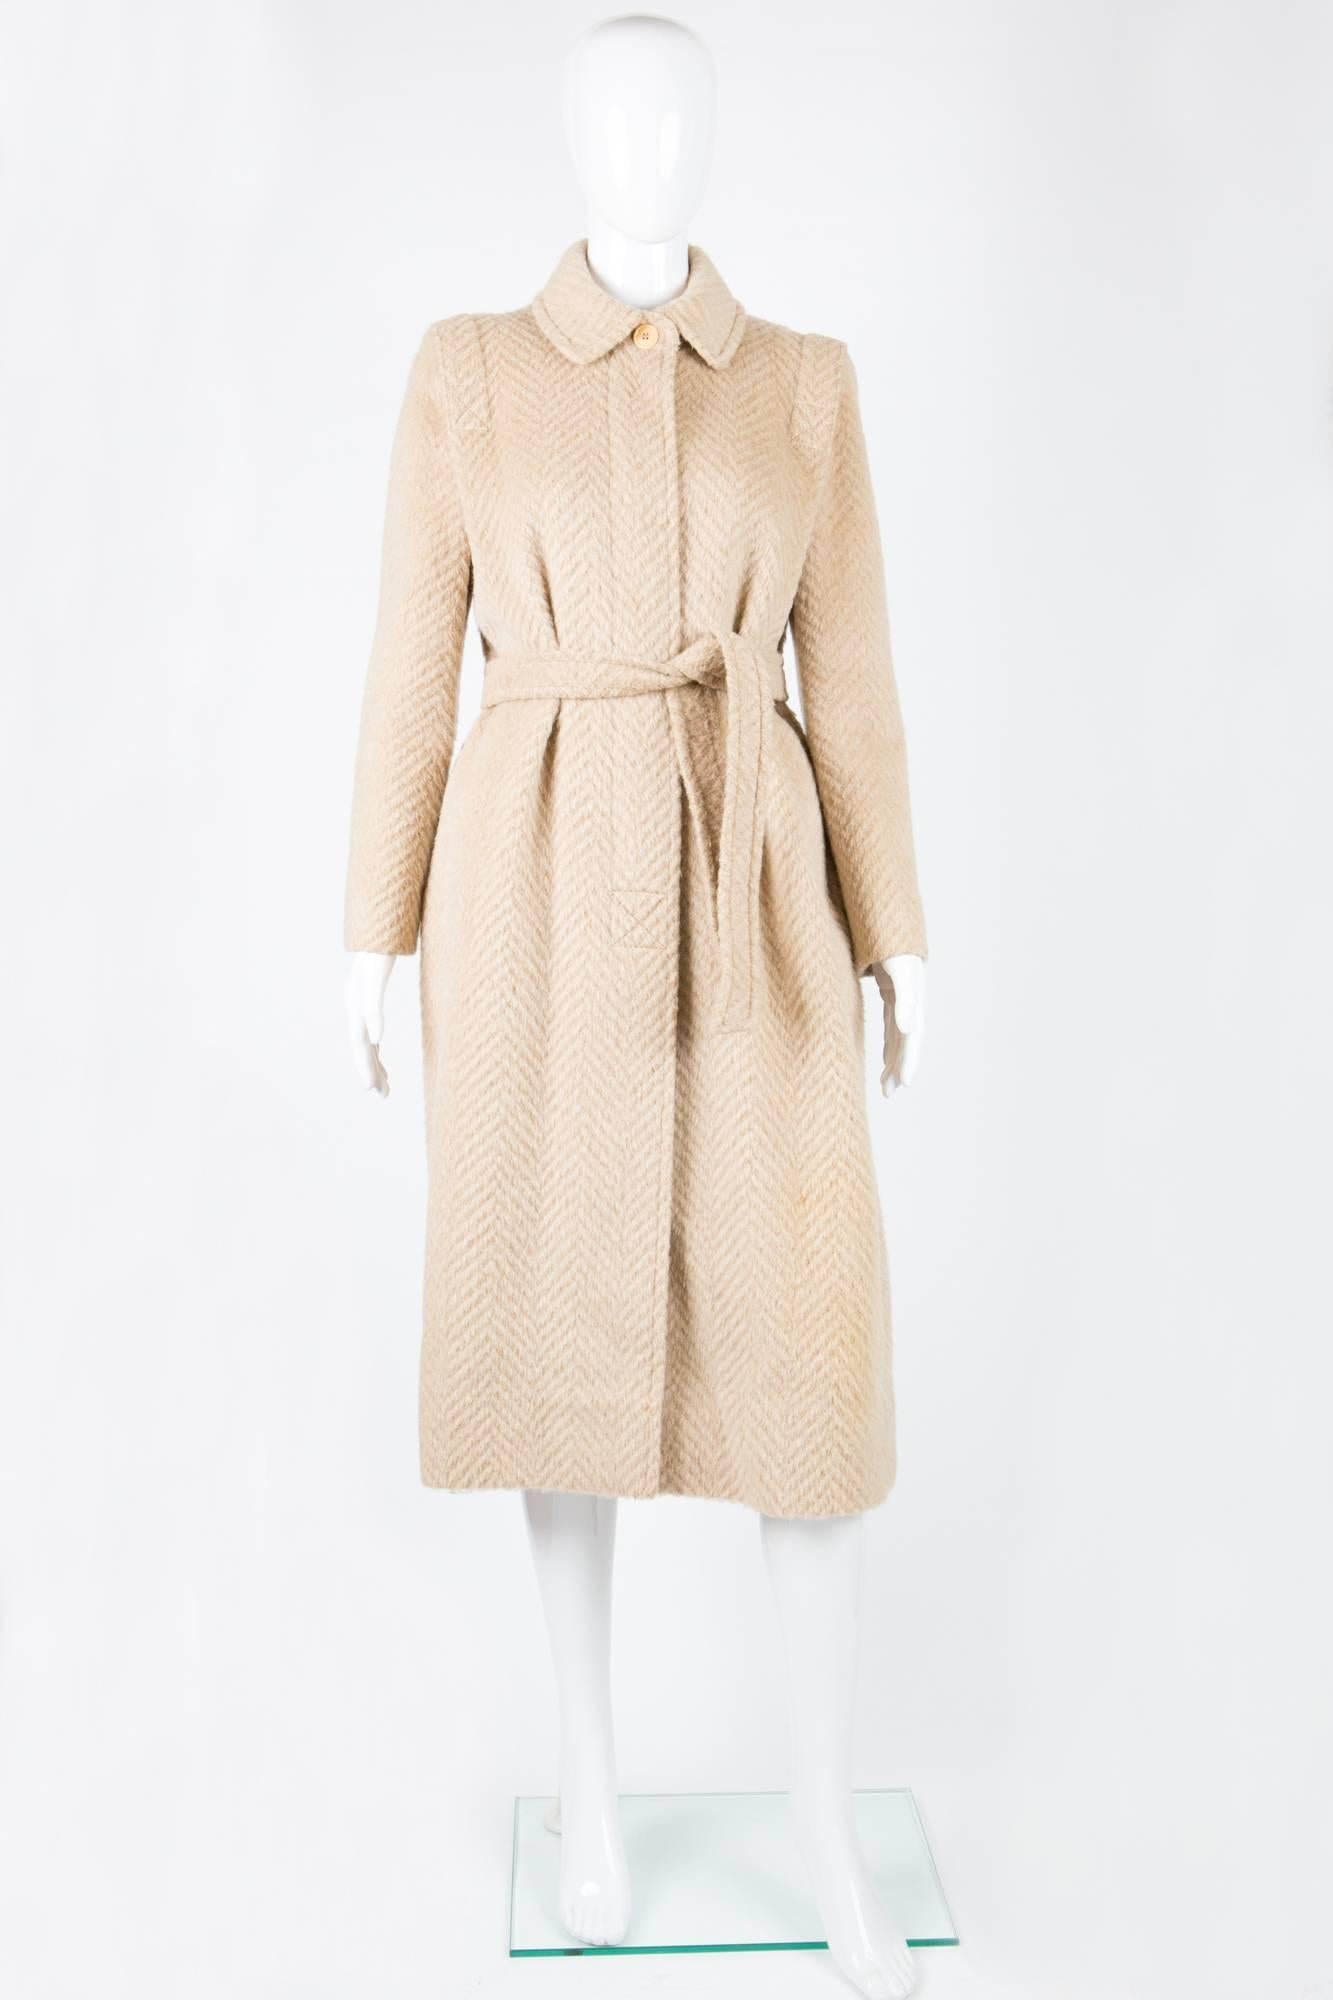 Fabulous Louis Feraud cream coat featuring an herringbone cream pattern, long sleeves, side seams pockets, detachable belt, logo silk lining, shoulder details.
In excellent vintage condition. 
Accrocs shoulder 15,3 in. (39cm)
Chest 33,8in. (